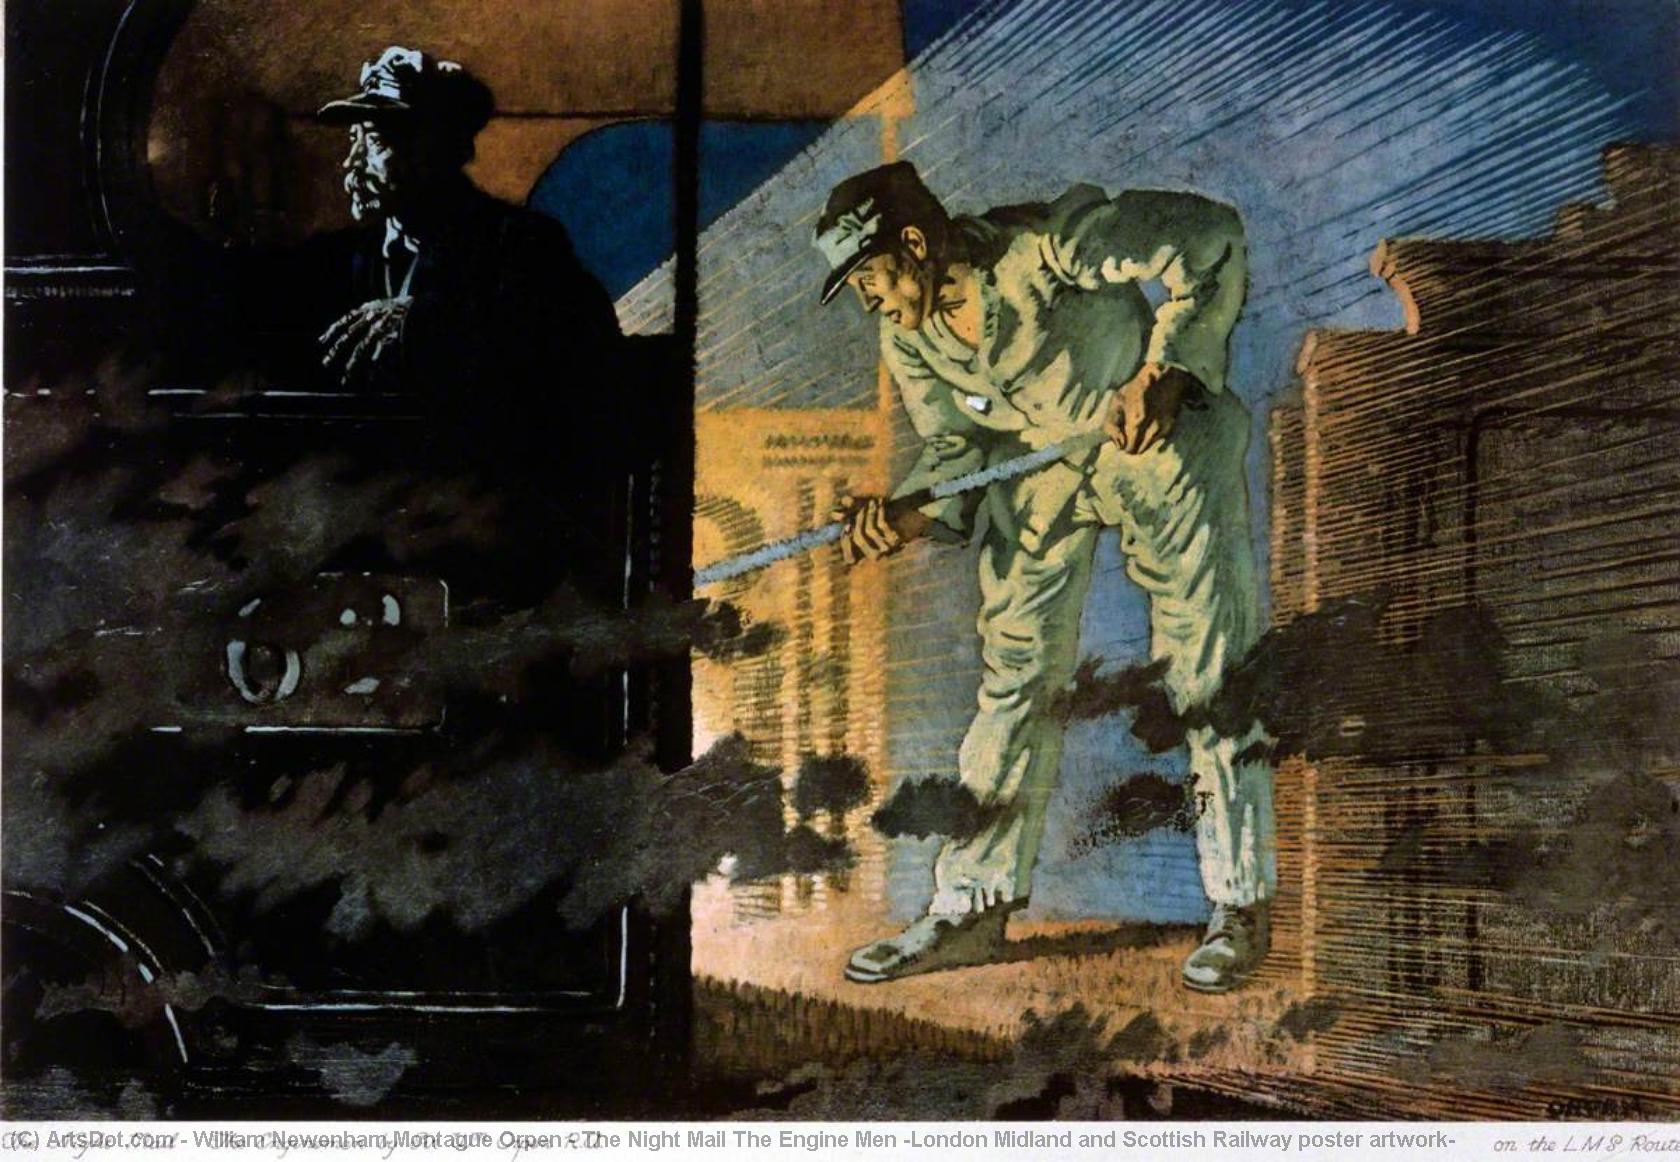 Buy Museum Art Reproductions The Night Mail The Engine Men (London Midland and Scottish Railway poster artwork), 1924 by William Newenham Montague Orpen | ArtsDot.com